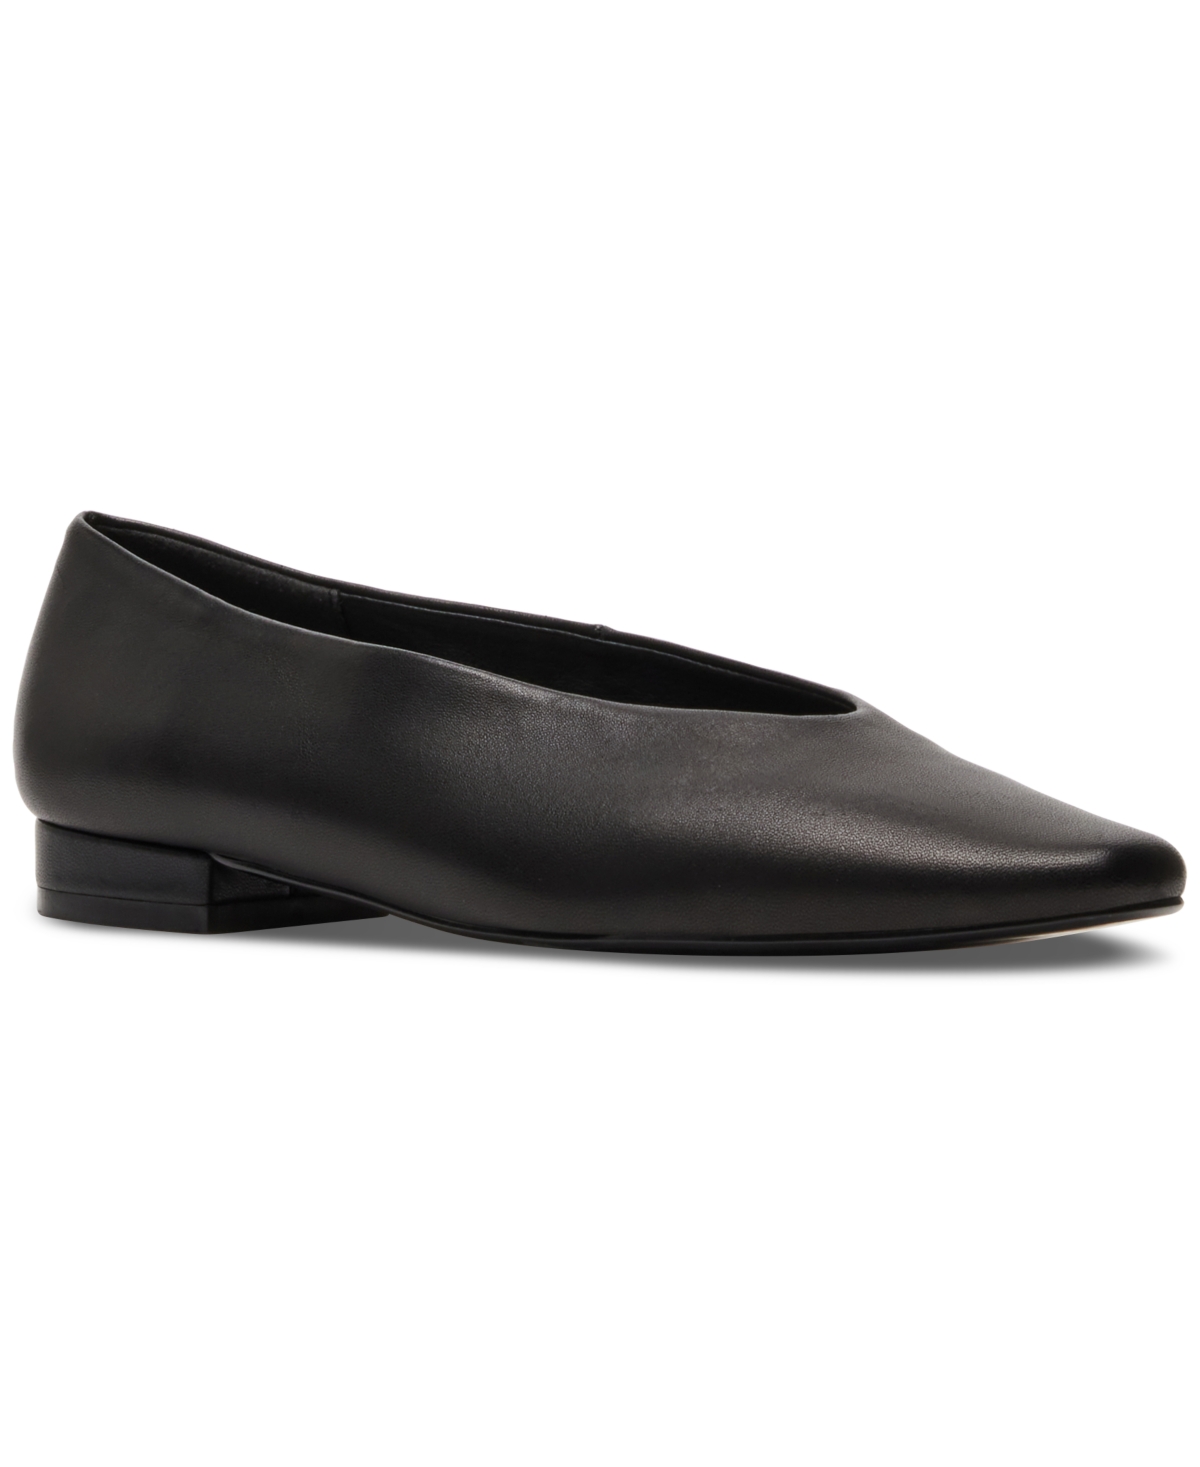 Women's Prima Tailored Pointed-Toe Flats - Black Leather